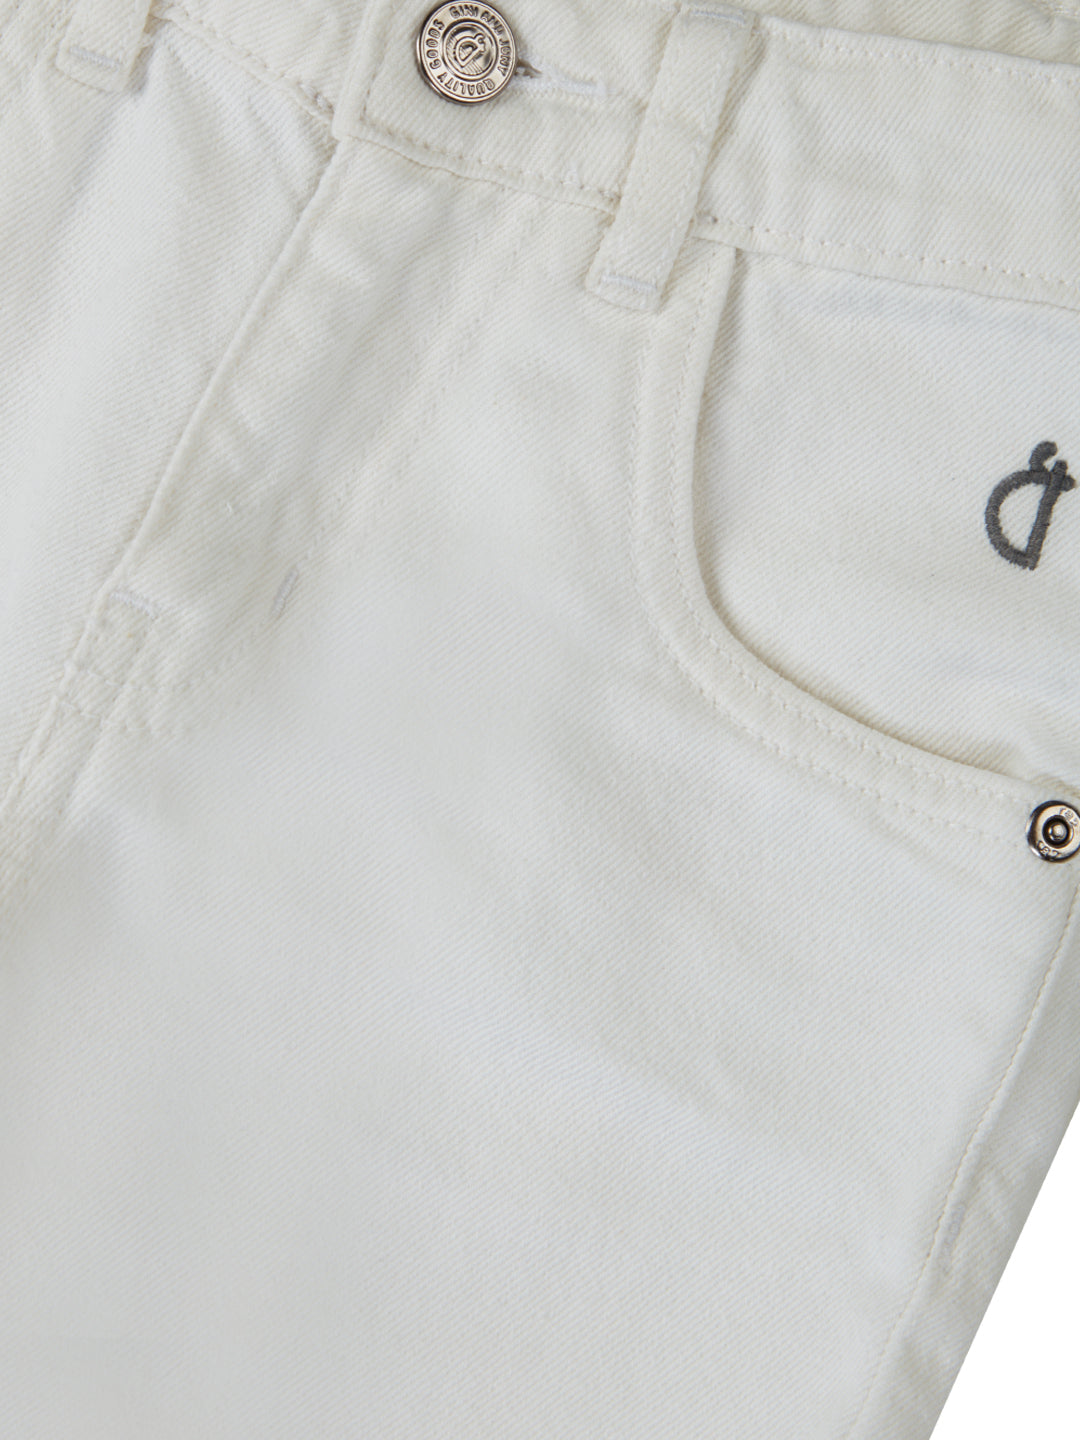 Boys White Solid Cotton Jeans Fixed Waist